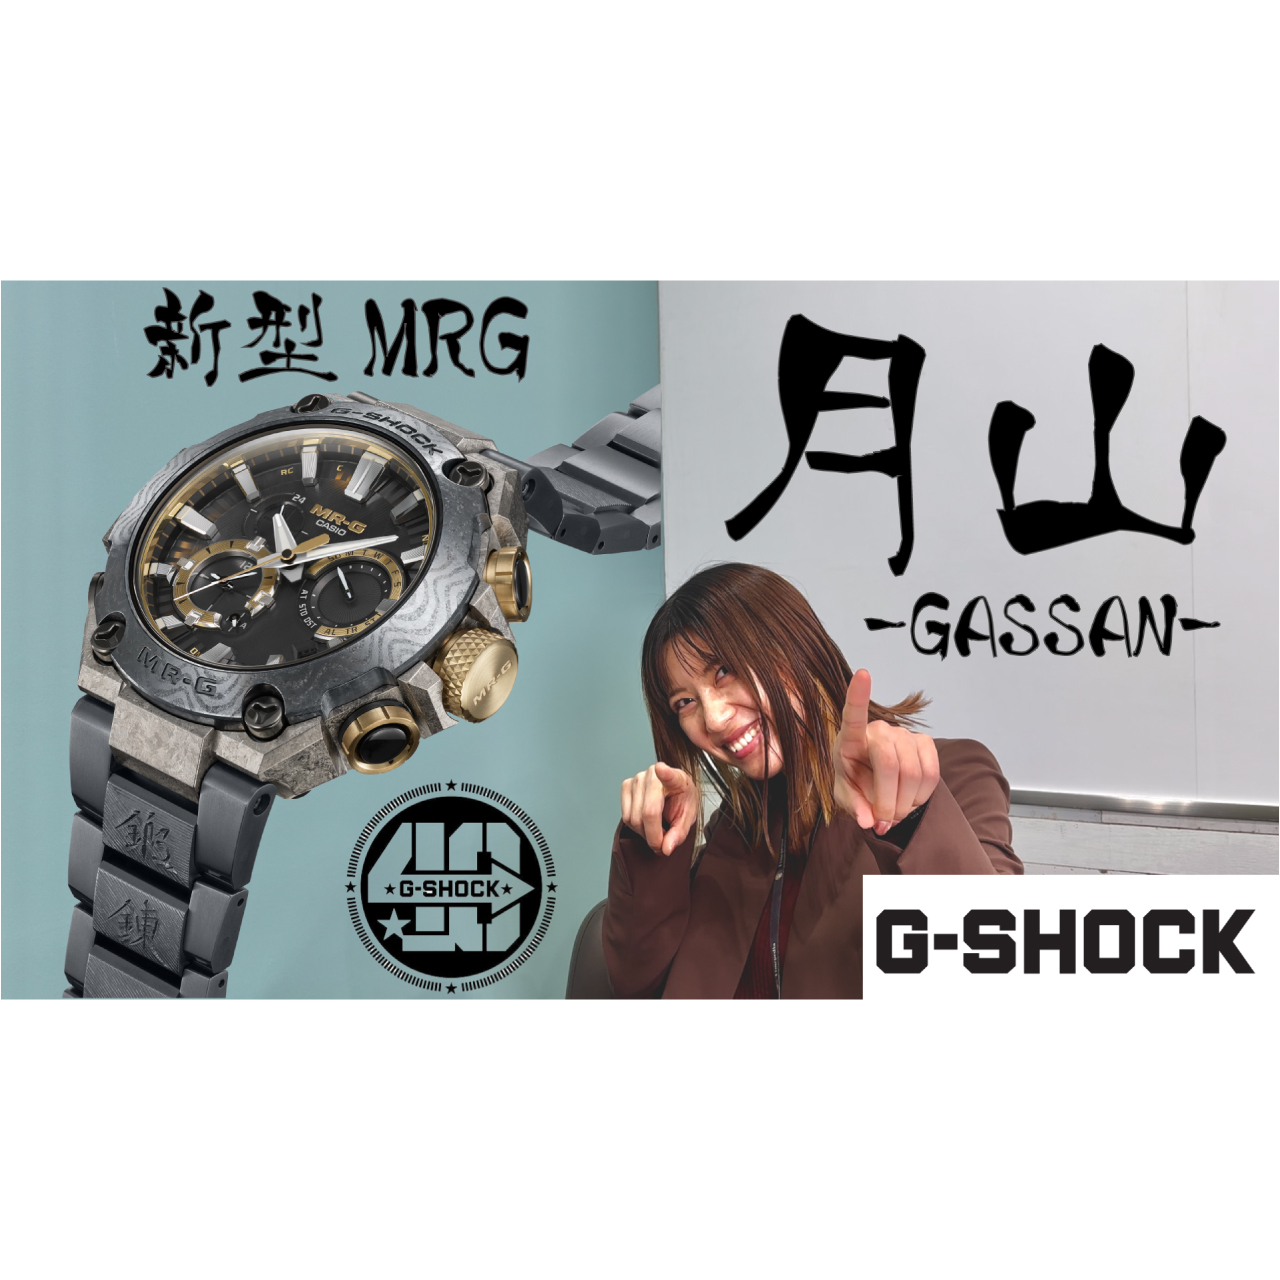 【G-SHOCK】新型MR-G　月山　ご紹介します！！